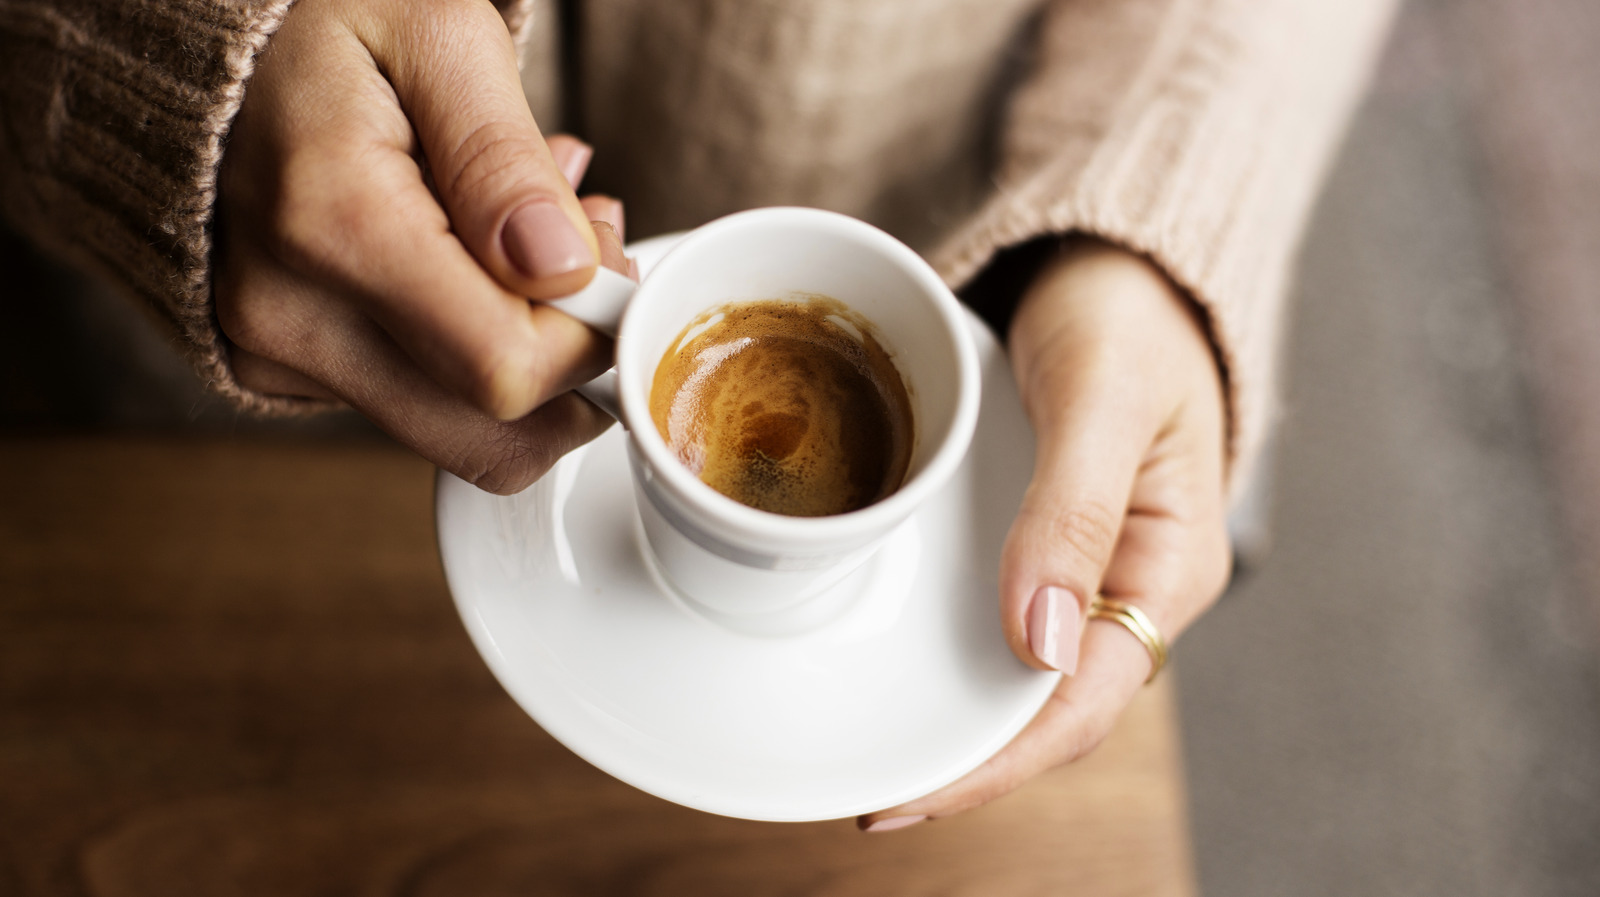 What does it mean to order a “Ristretto” or “Long-Shot” espresso?